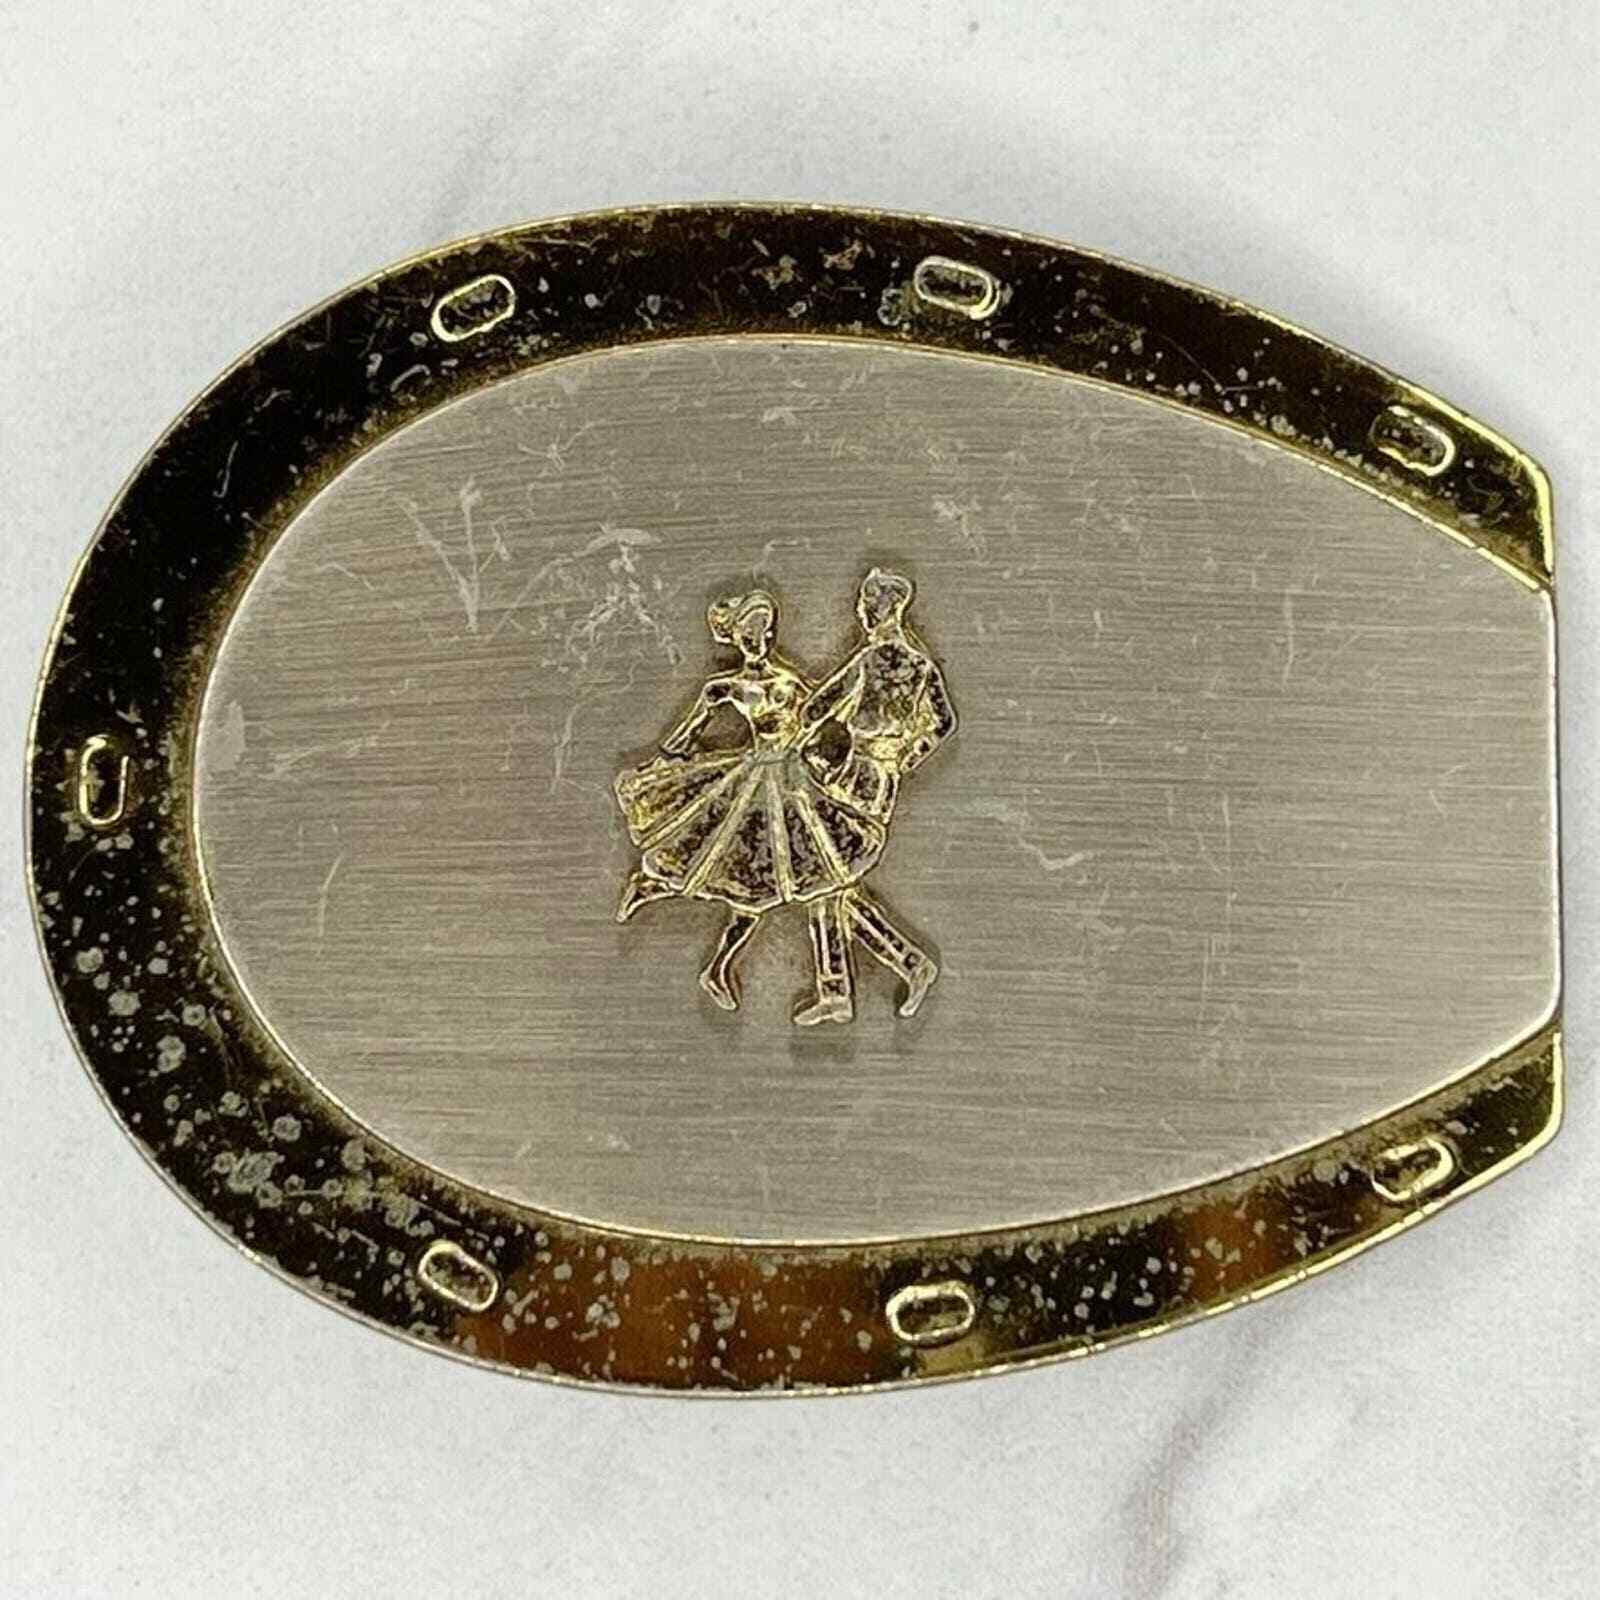 Vintage Silver and Gold Tone Horseshoe Square Dancing Western Belt Buckle